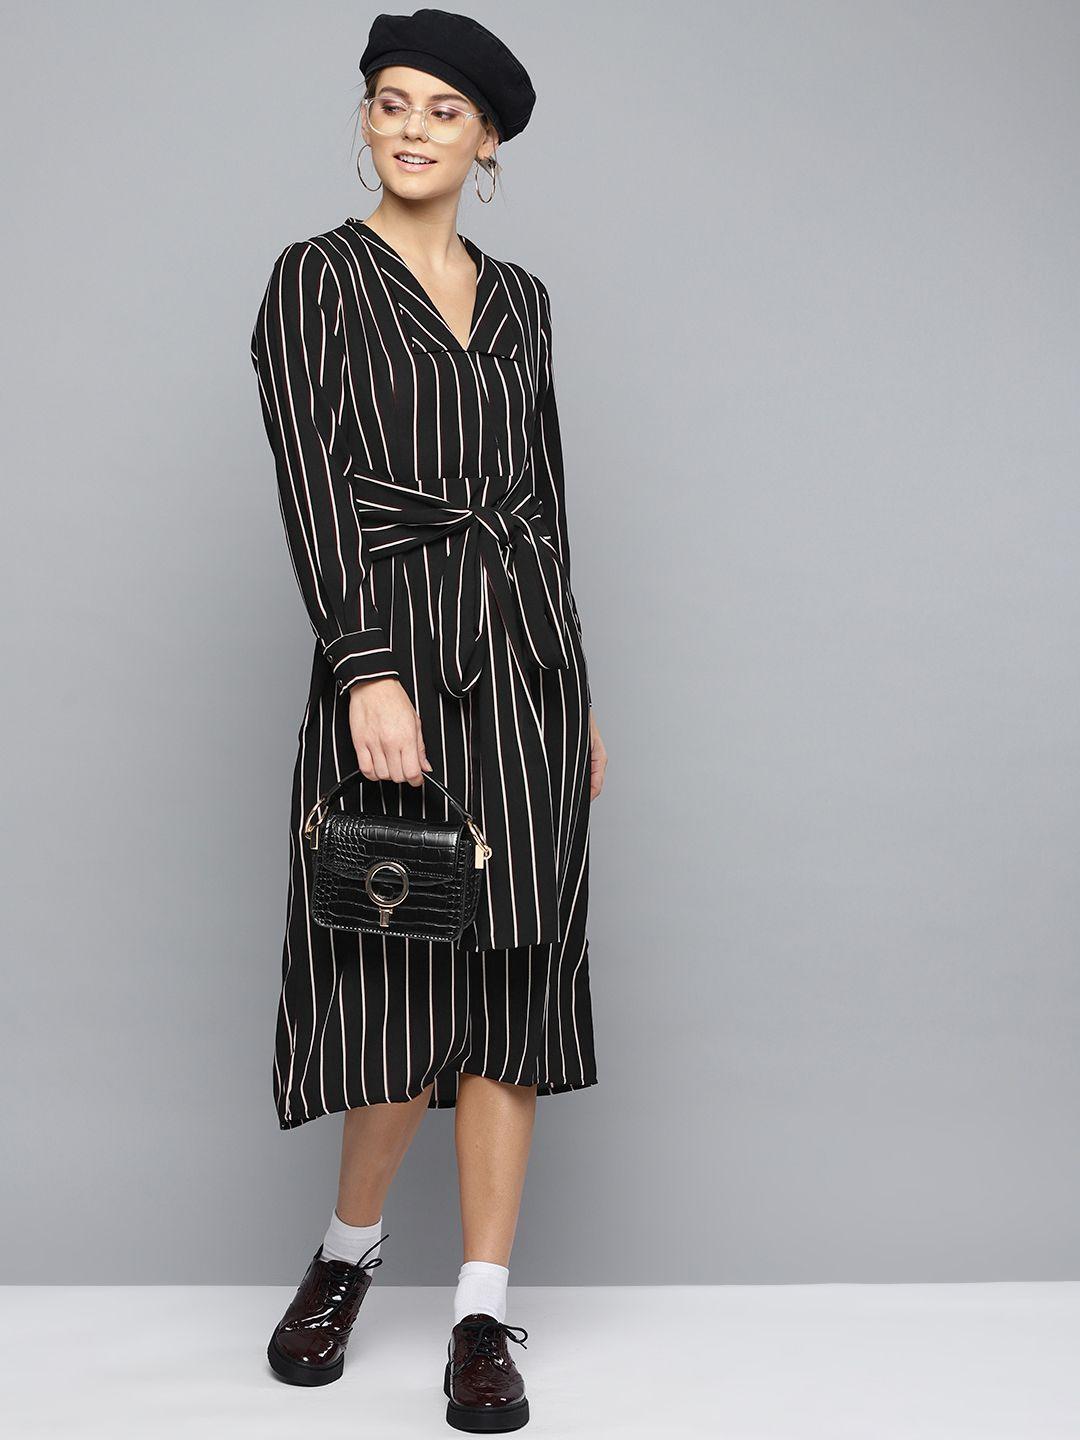 marie claire women black & off-white striped a-line dress